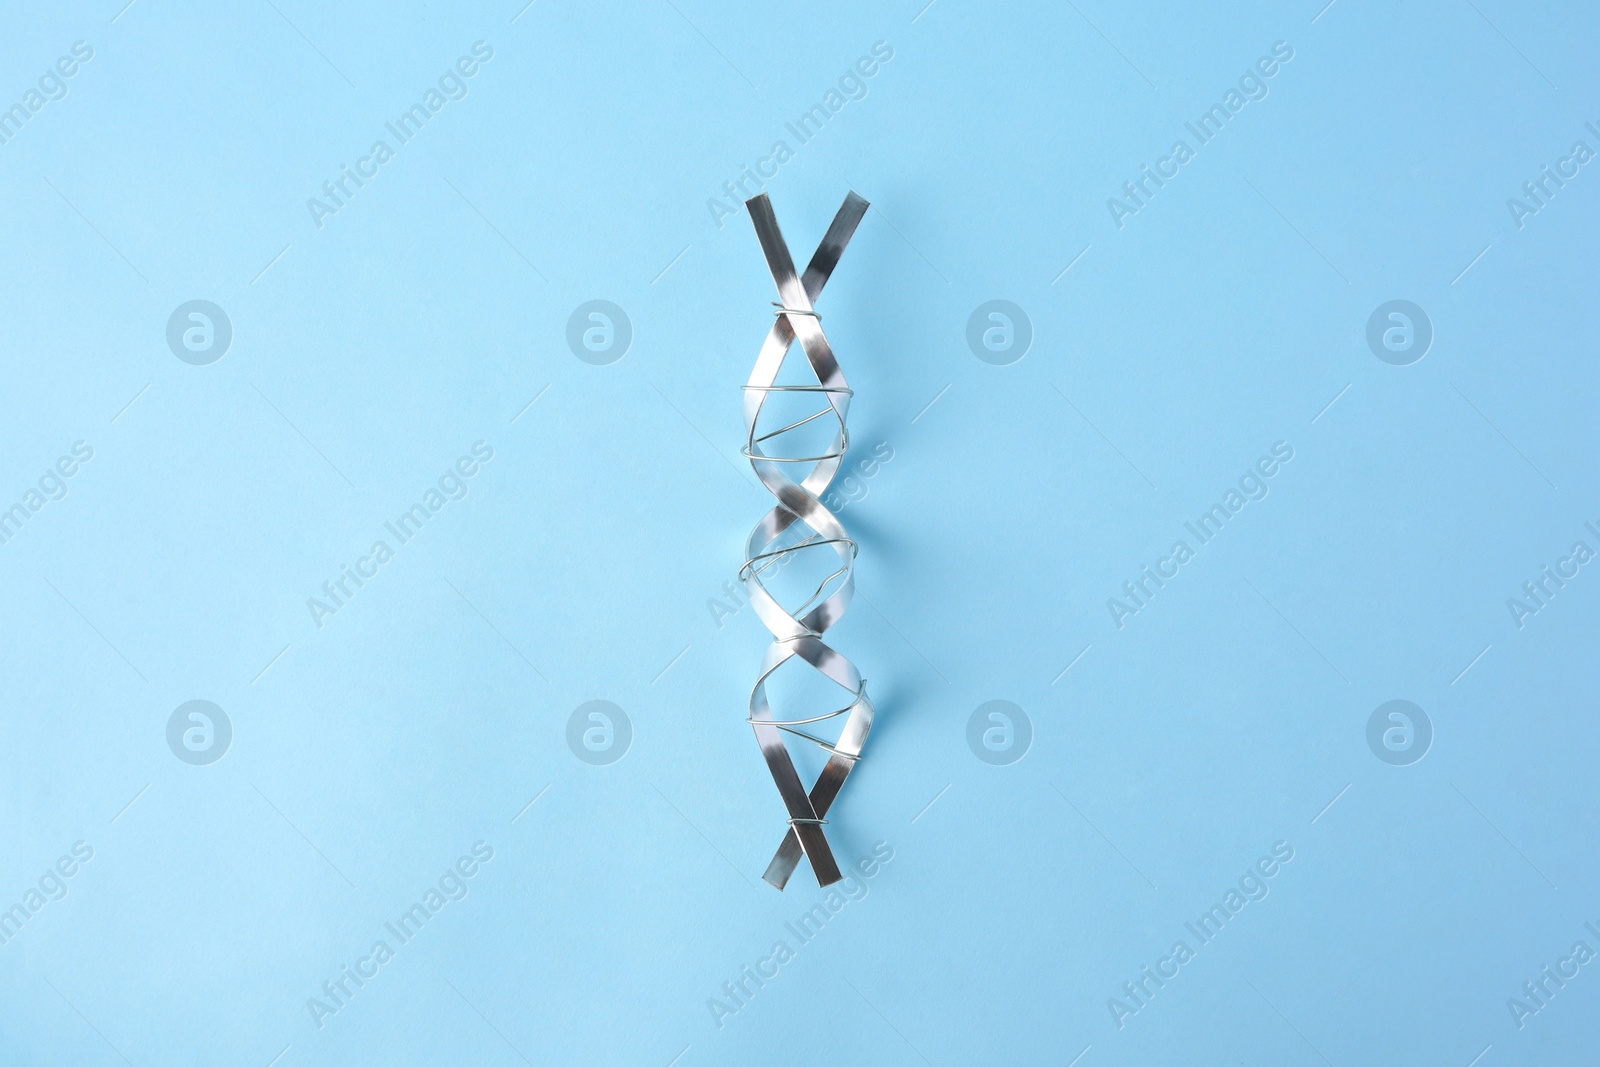 Photo of DNA molecular chain model made of metal on light blue background, top view